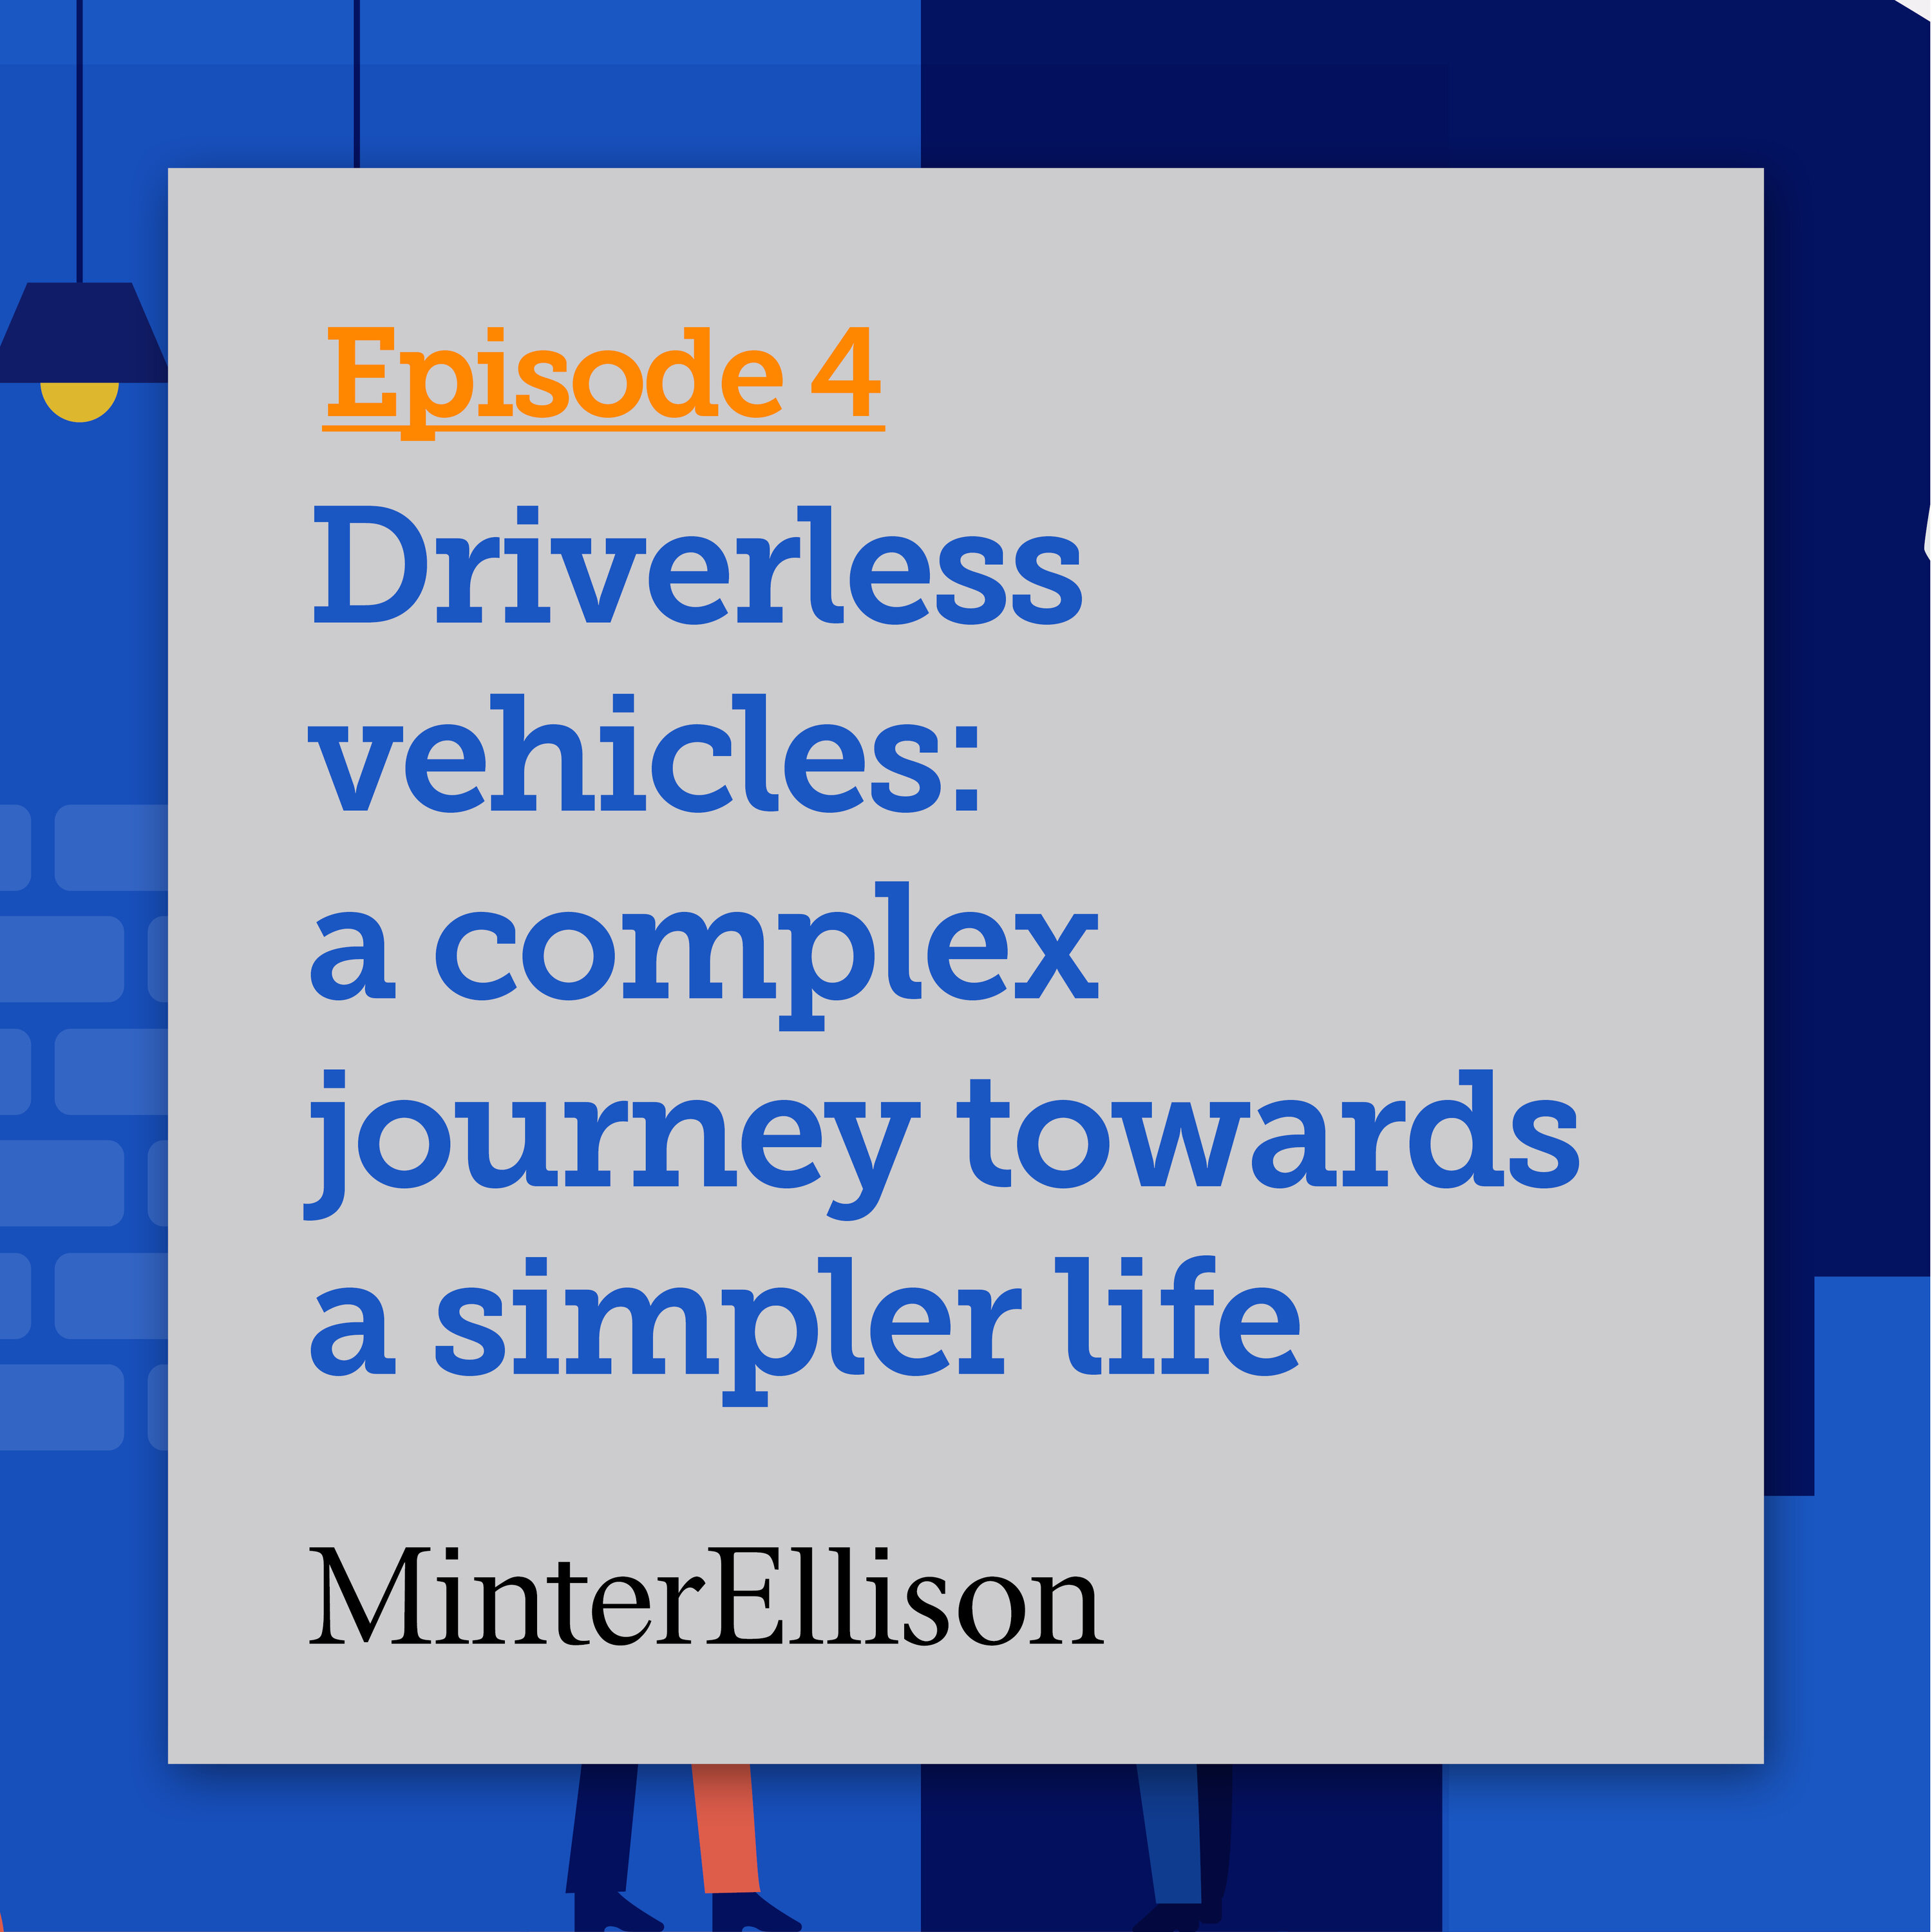 Driverless vehicles: a complex journey towards a simpler life